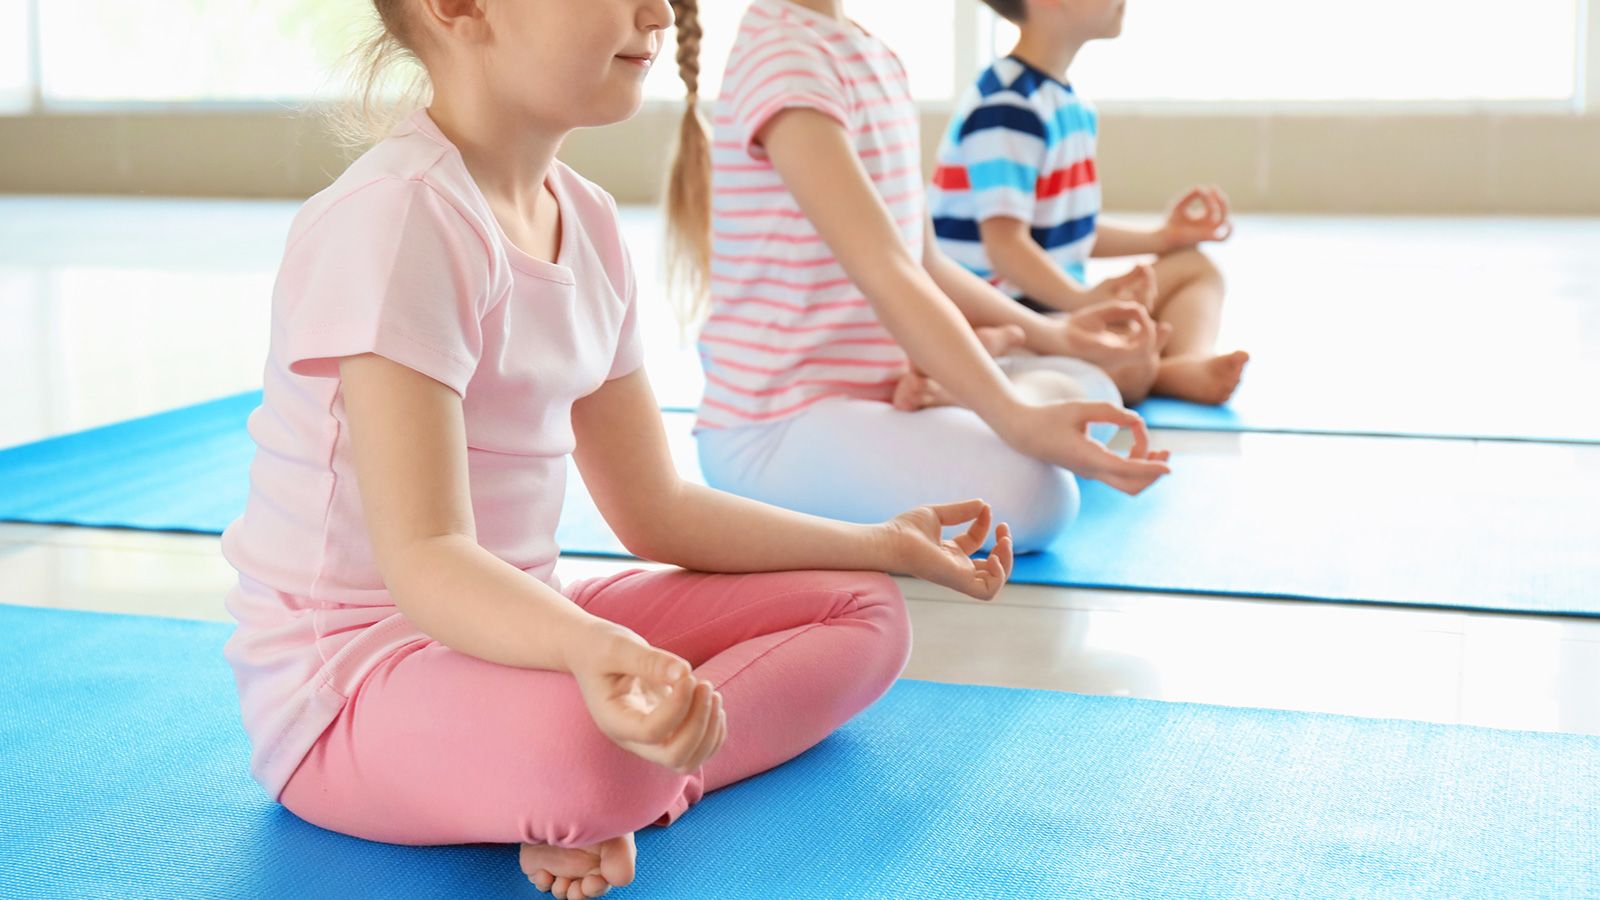 Supporting The Child With Special Needs Through Yoga And Mindfulness  (Complete Series) - Zensational Kids Mindfulness and SEL